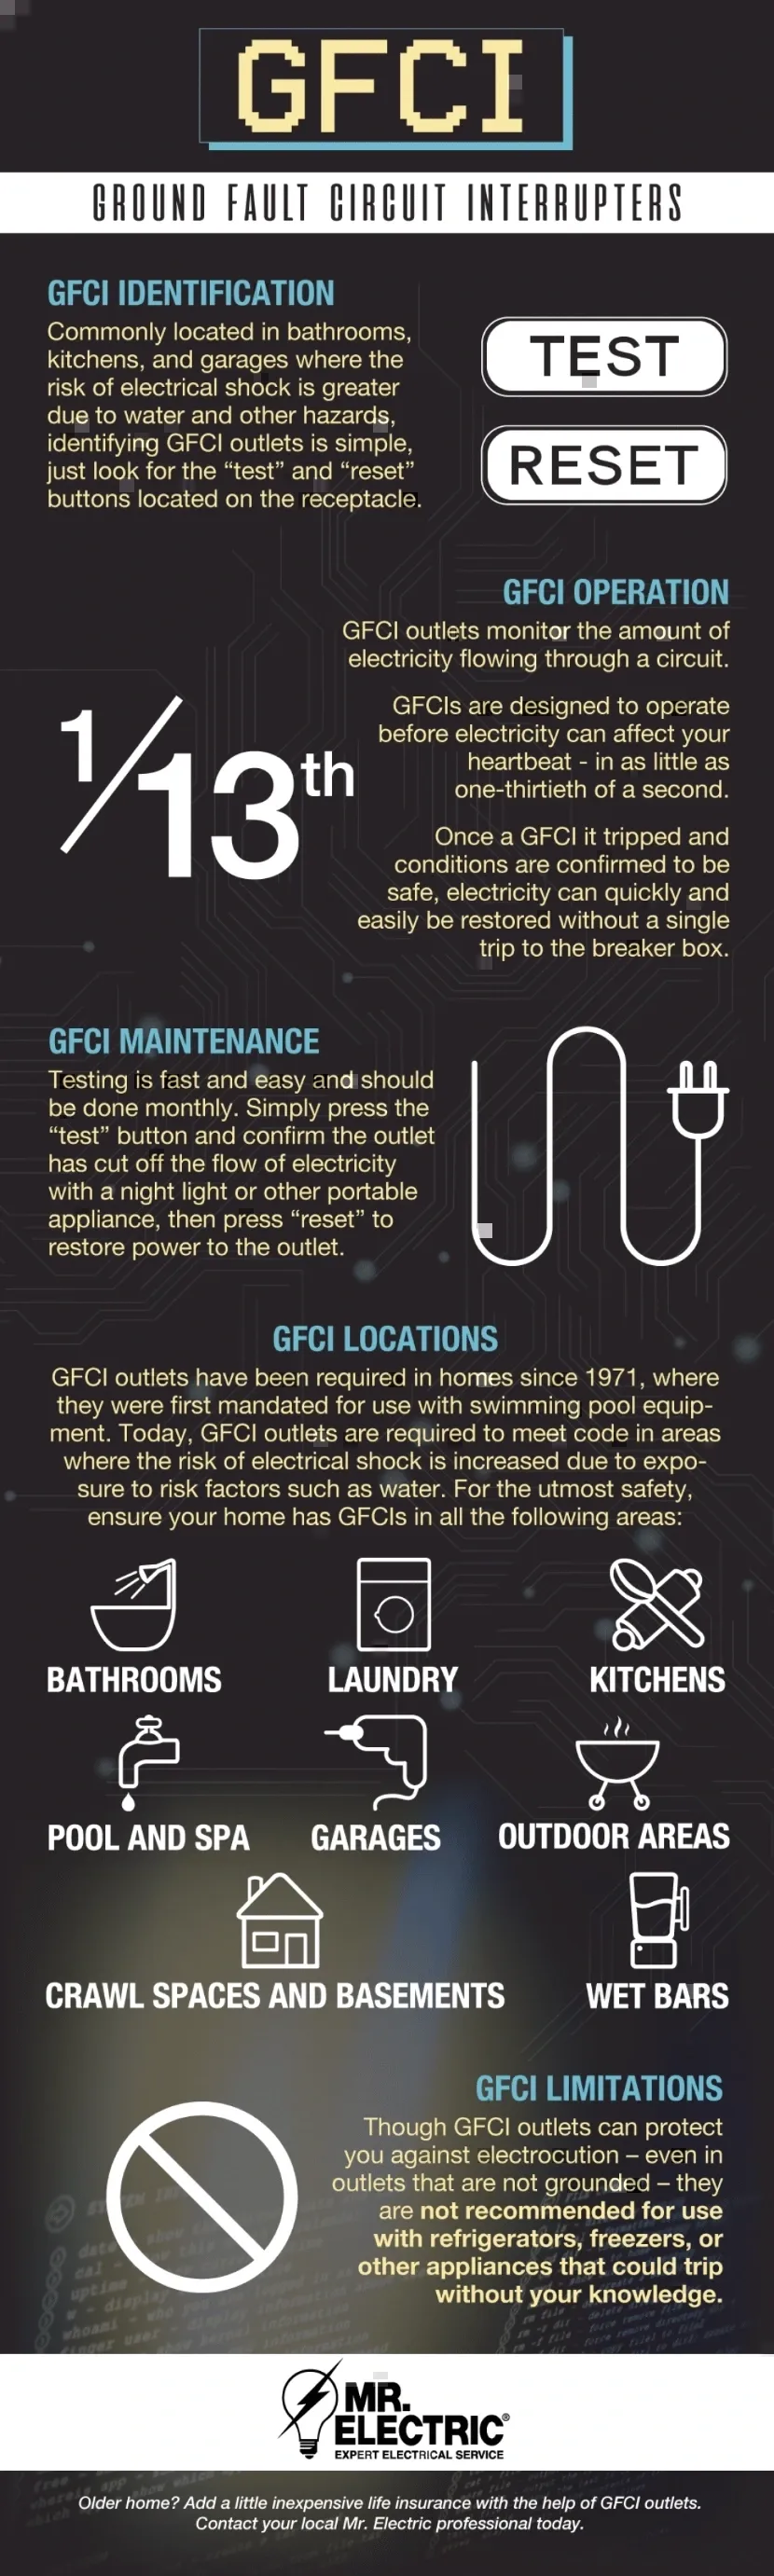 A breakdown of ground fault circuit interrupters.